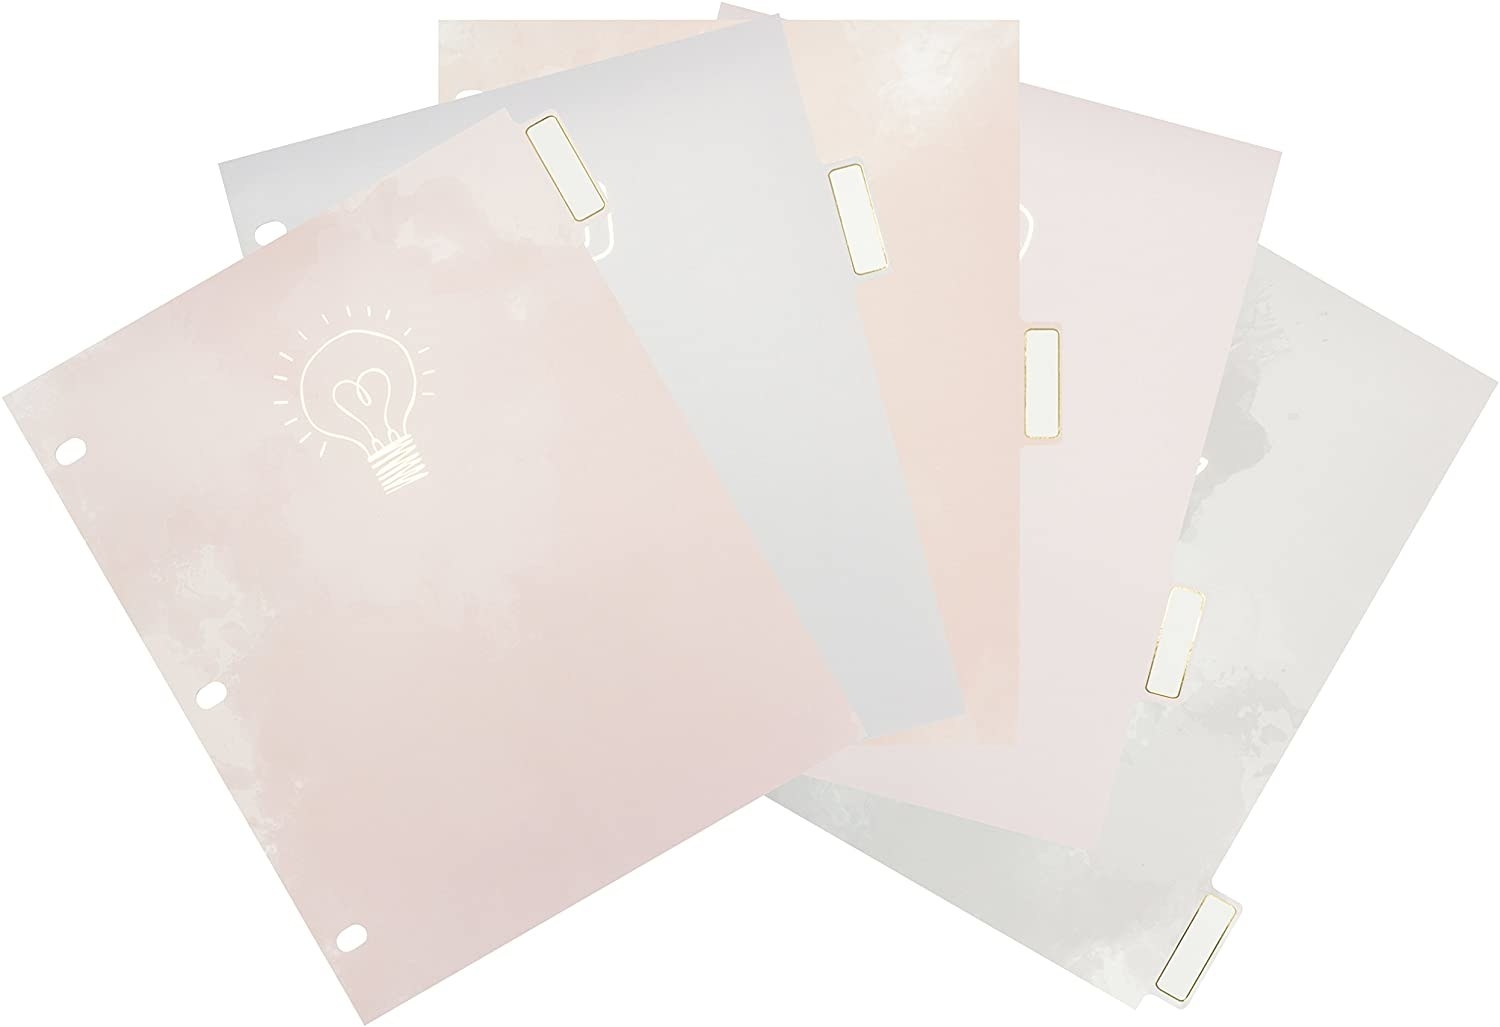 Five paper binder dividers spread out on a plain background